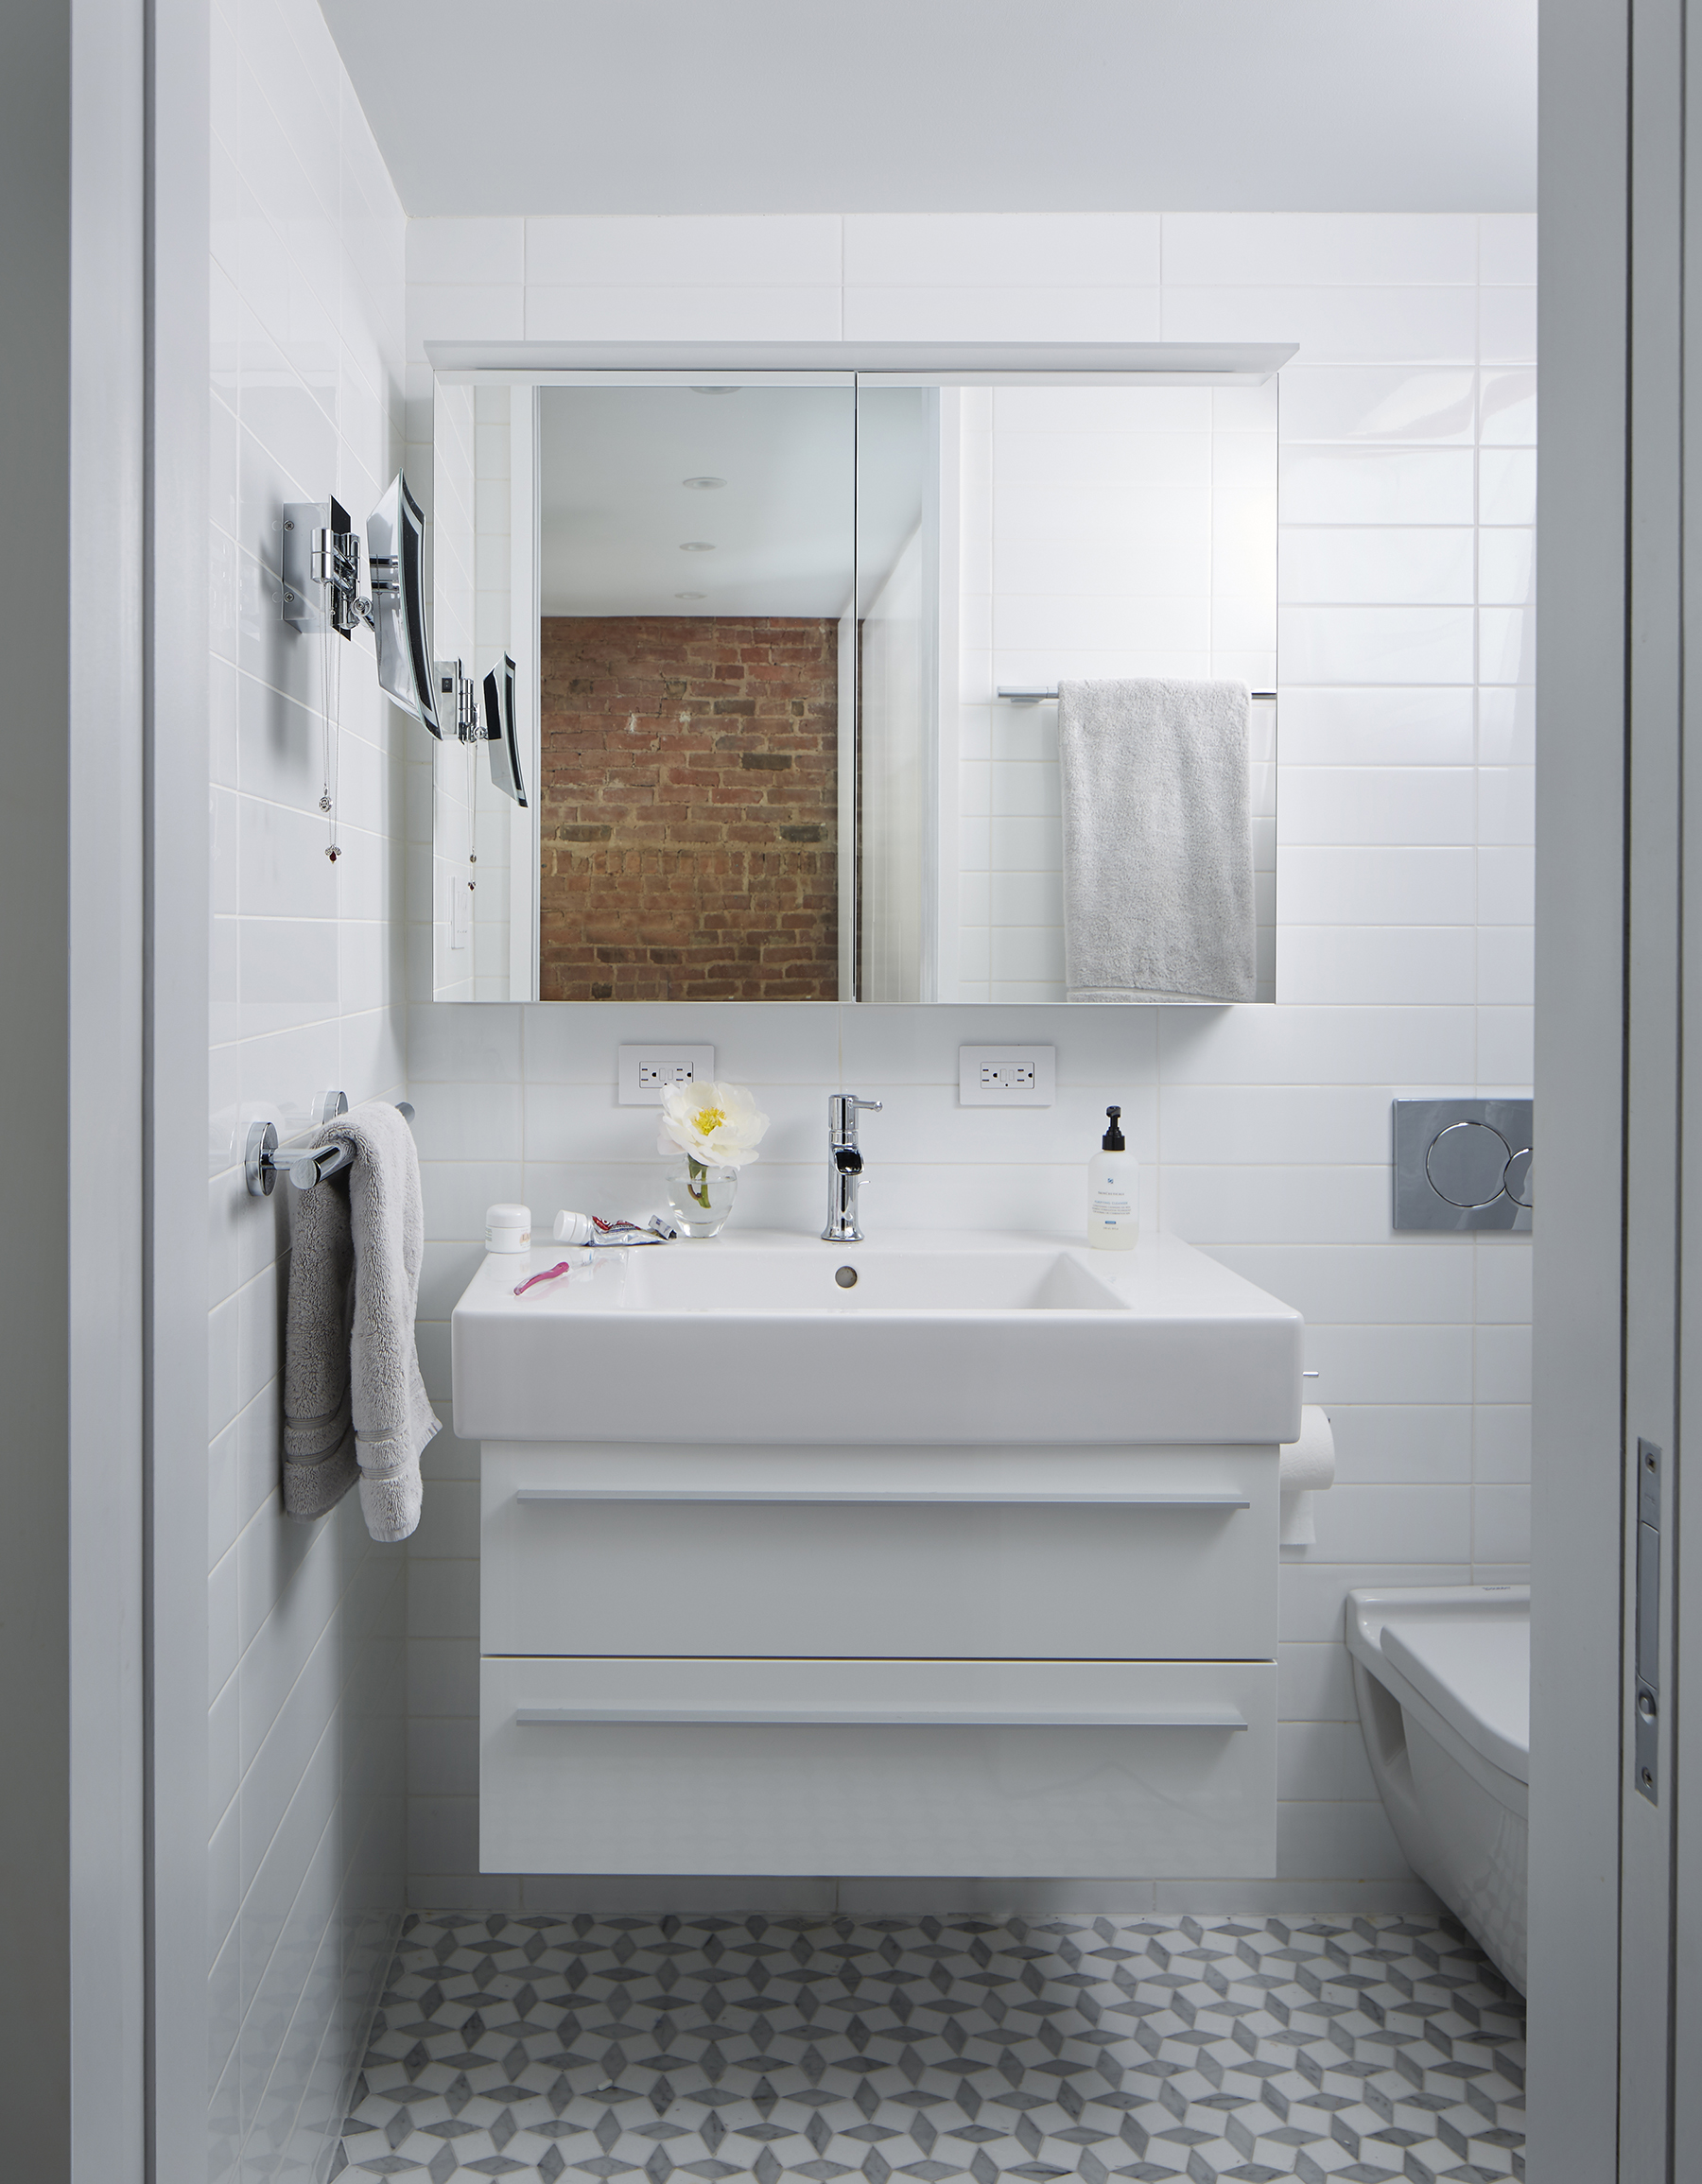 STADT Architecture, Loft, Duravit, marble mosaic, white, STADT, nyc architects, ny apartment renovation